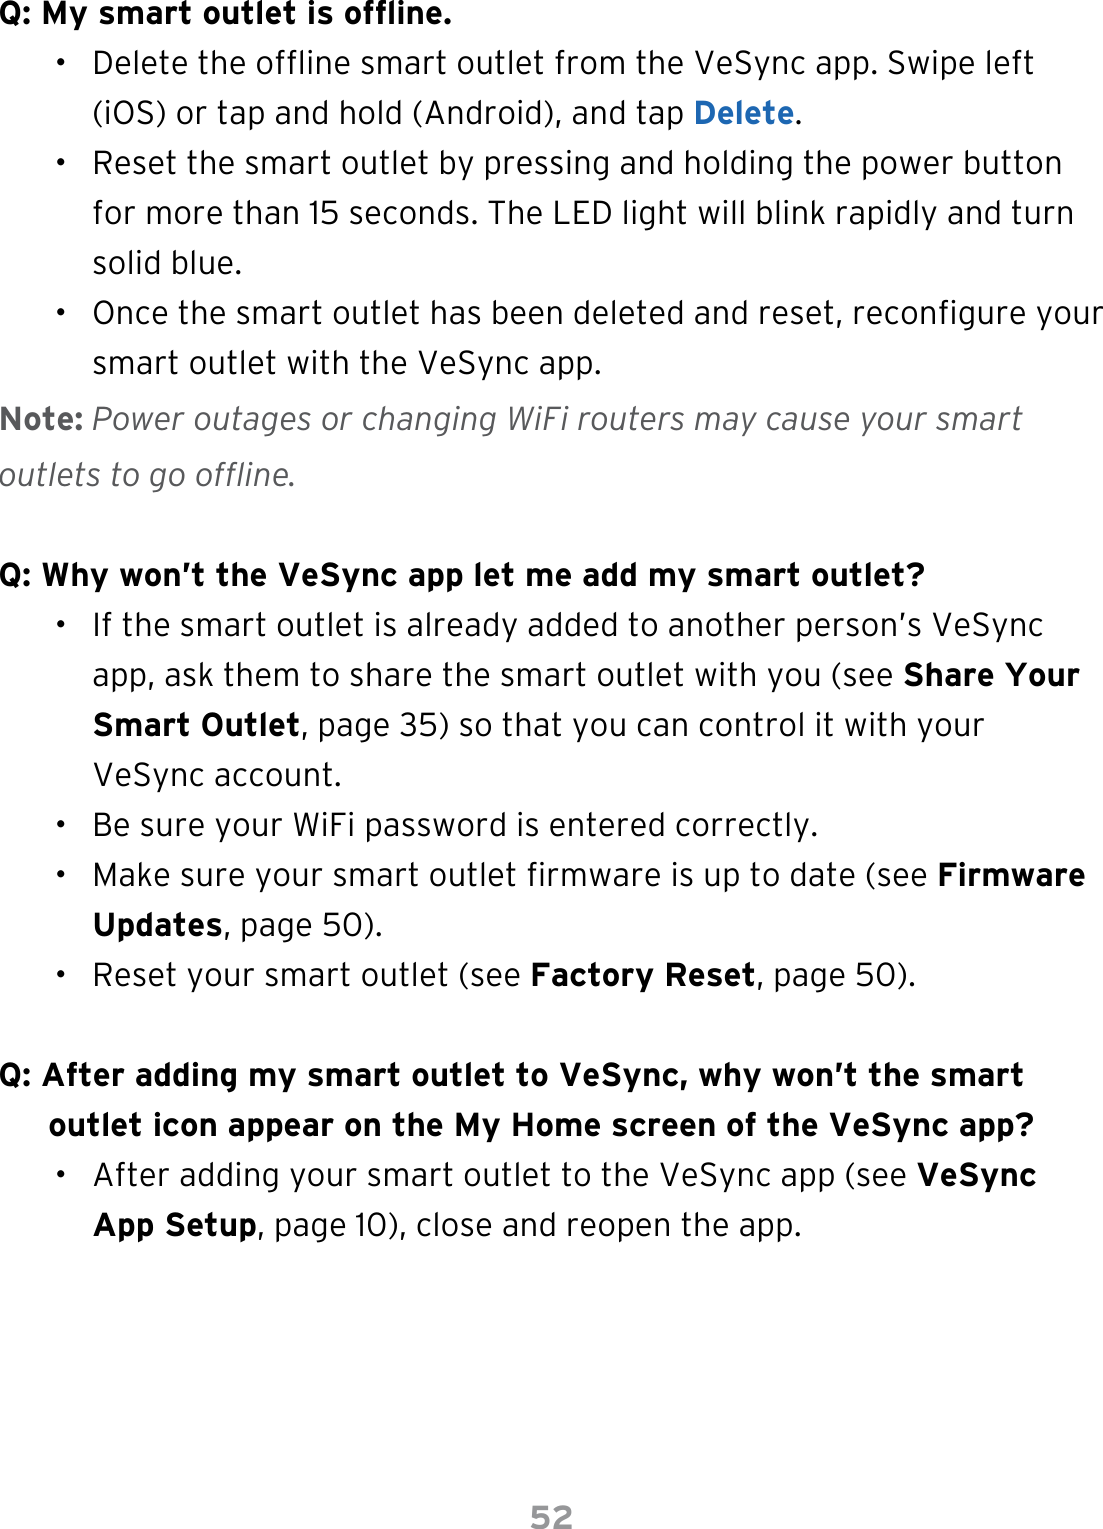 52Q: My smart outlet is ofine.•  Delete the ofine smart outlet from the VeSync app. Swipe left (iOS) or tap and hold (Android), and tap Delete.•  Reset the smart outlet by pressing and holding the power button for more than 15 seconds. The LED light will blink rapidly and turn solid blue.•  Once the smart outlet has been deleted and reset, recongure your smart outlet with the VeSync app.Note: Power outages or changing WiFi routers may cause your smart outlets to go offline.Q: Why won’t the VeSync app let me add my smart outlet?•  If the smart outlet is already added to another person’s VeSync app, ask them to share the smart outlet with you (see Share Your Smart Outlet, page 35) so that you can control it with your VeSync account.•  Be sure your WiFi password is entered correctly.•  Make sure your smart outlet rmware is up to date (see Firmware Updates, page 50).•  Reset your smart outlet (see Factory Reset, page 50).Q: After adding my smart outlet to VeSync, why won’t the smart outlet icon appear on the My Home screen of the VeSync app?•  After adding your smart outlet to the VeSync app (see VeSync App Setup, page 10), close and reopen the app.